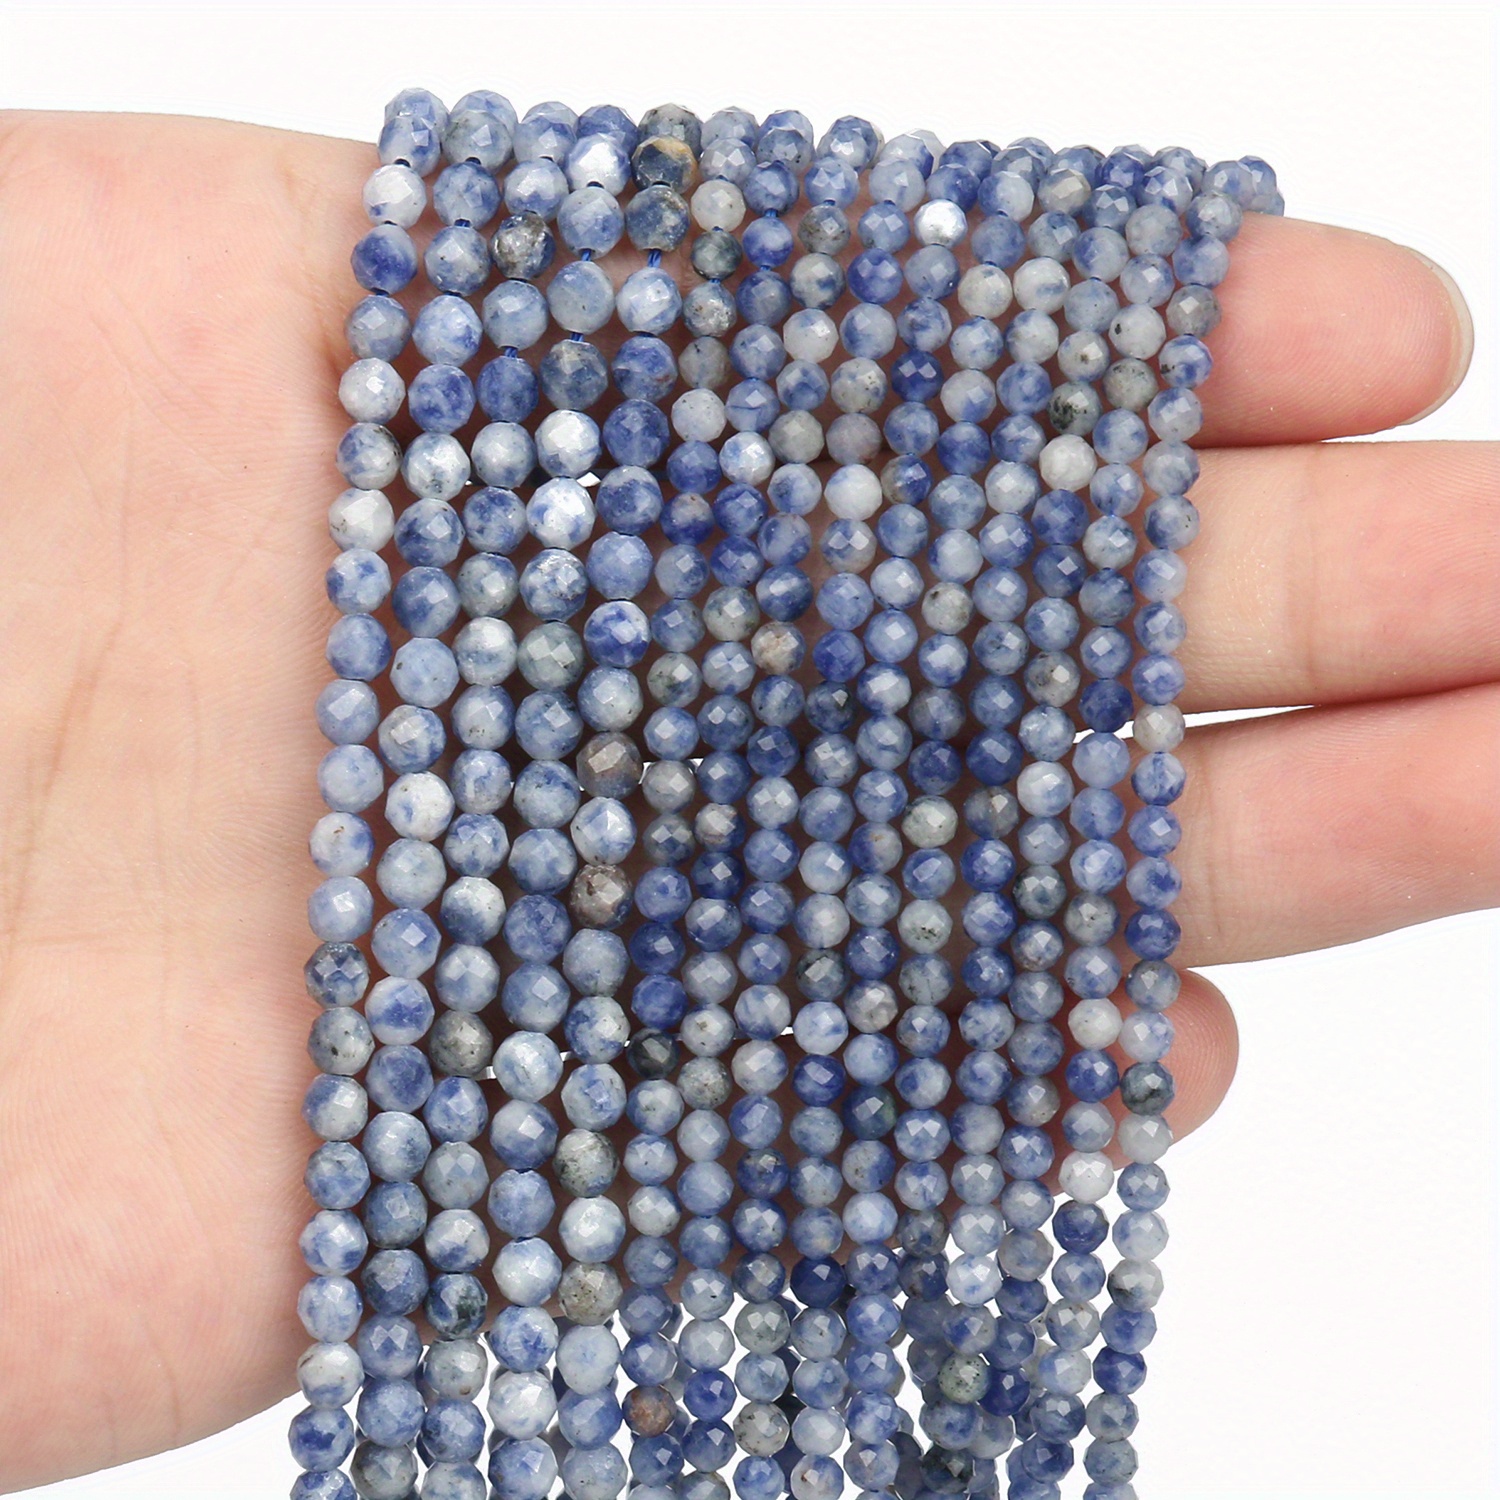 Buy The Mens Tree Agate and Silver Beaded Necklace | JaeBee Jewelry